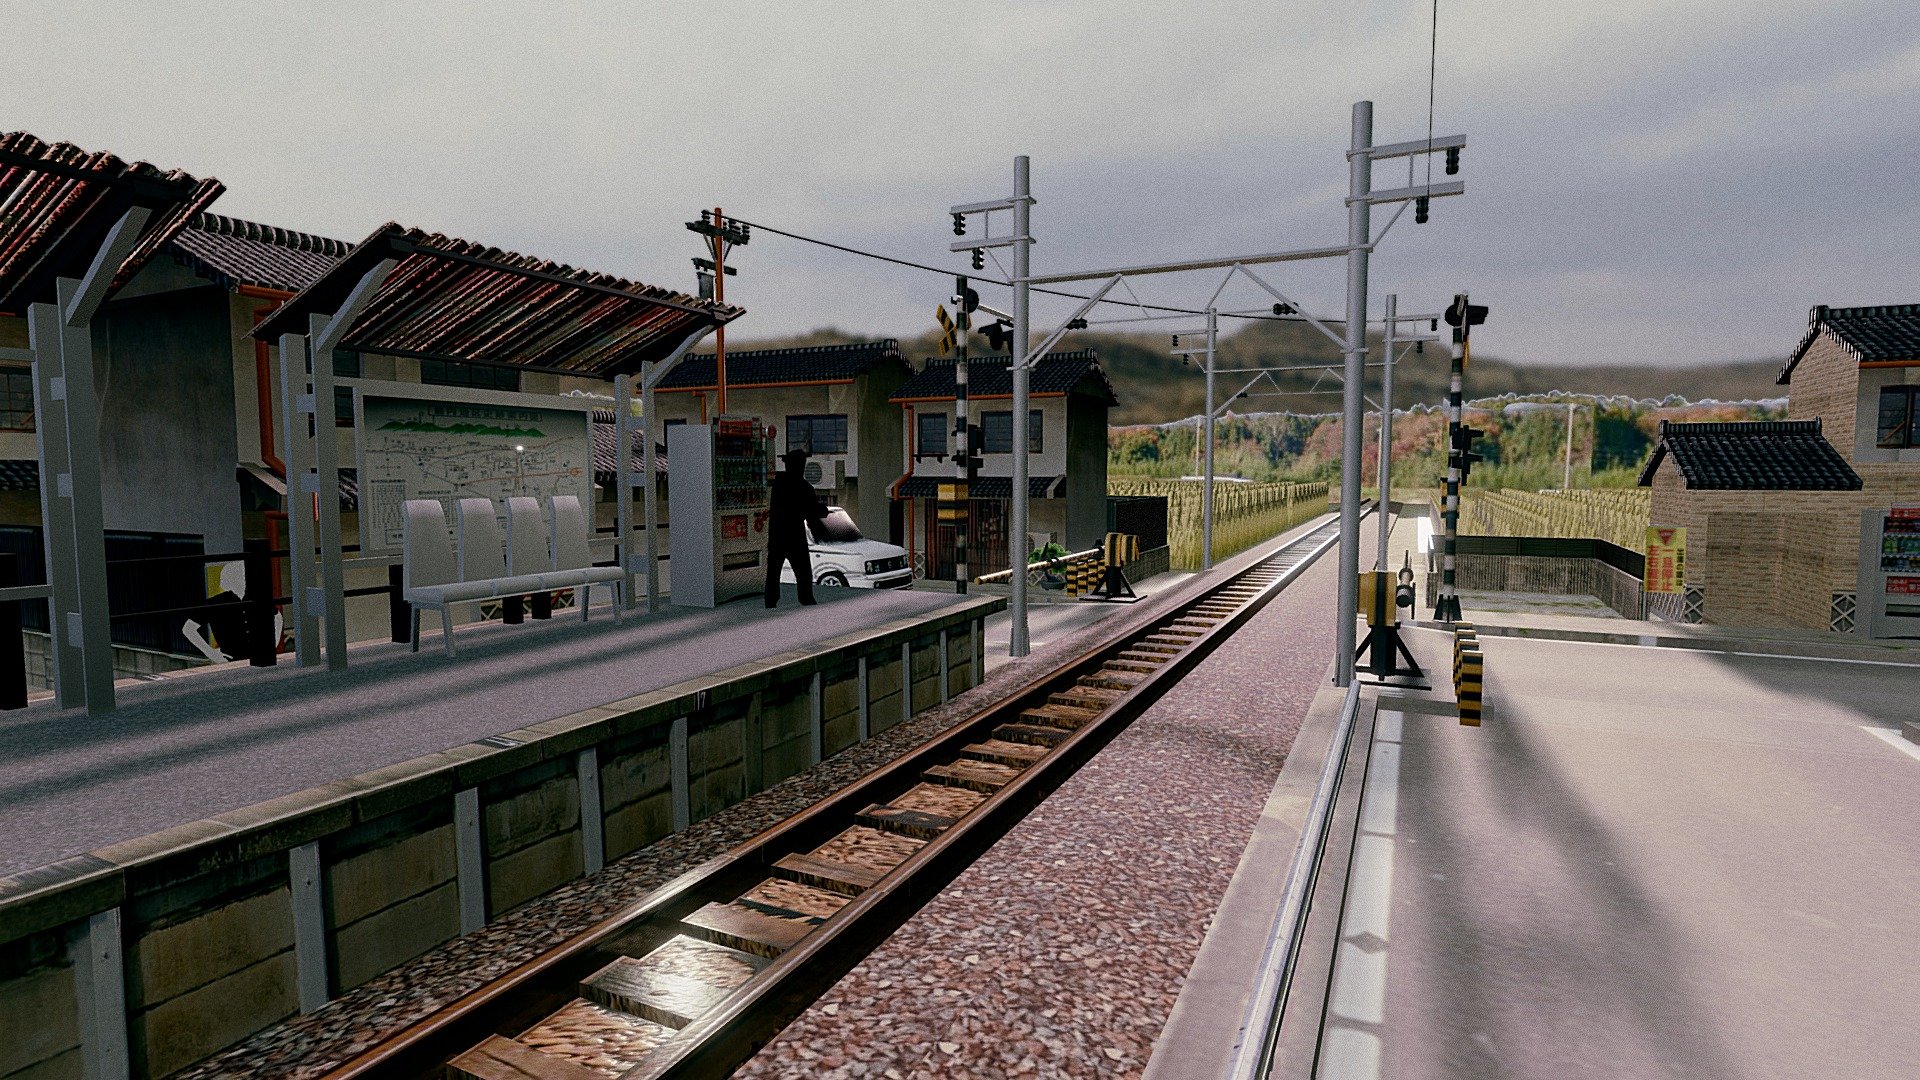 A peaceful morning in a Japanese farming village full of rice fields and a small train station.

Made with Sketchup + Procreate
Rendered in Sketchfab - A piece of Japan 2 - Buy Royalty Free 3D model by fangzhangmnm 3d model